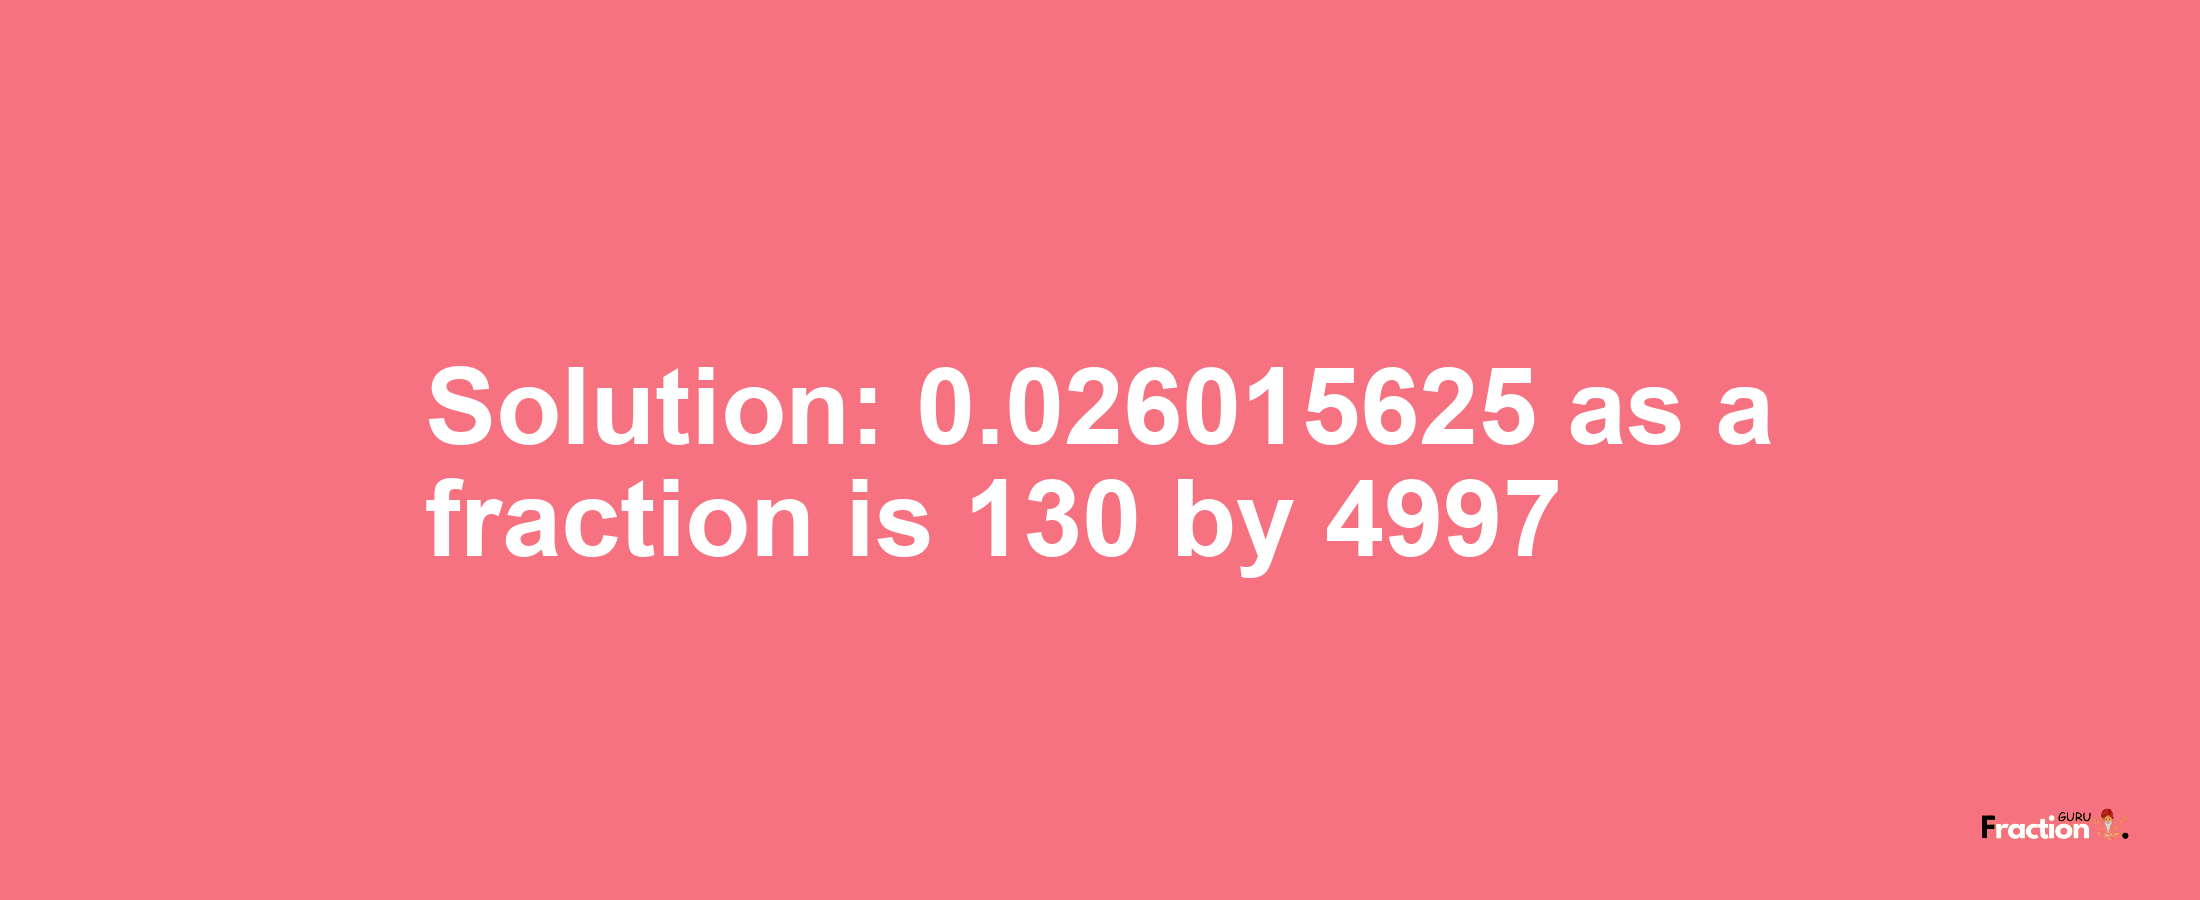 Solution:0.026015625 as a fraction is 130/4997